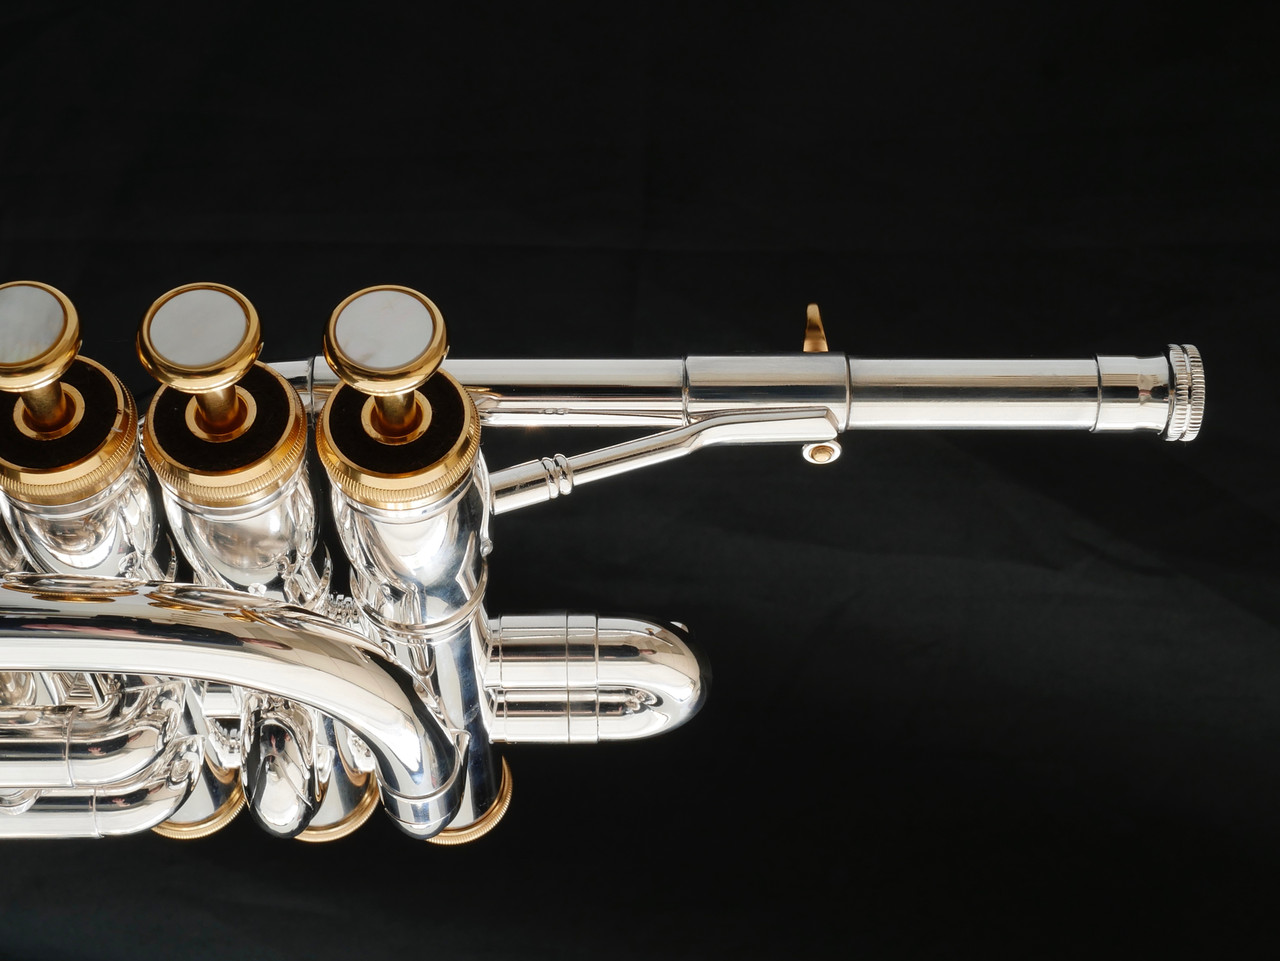 The Incredible XO 1700 Bb/A Piccolo Trumpet in silver plate with gold trim